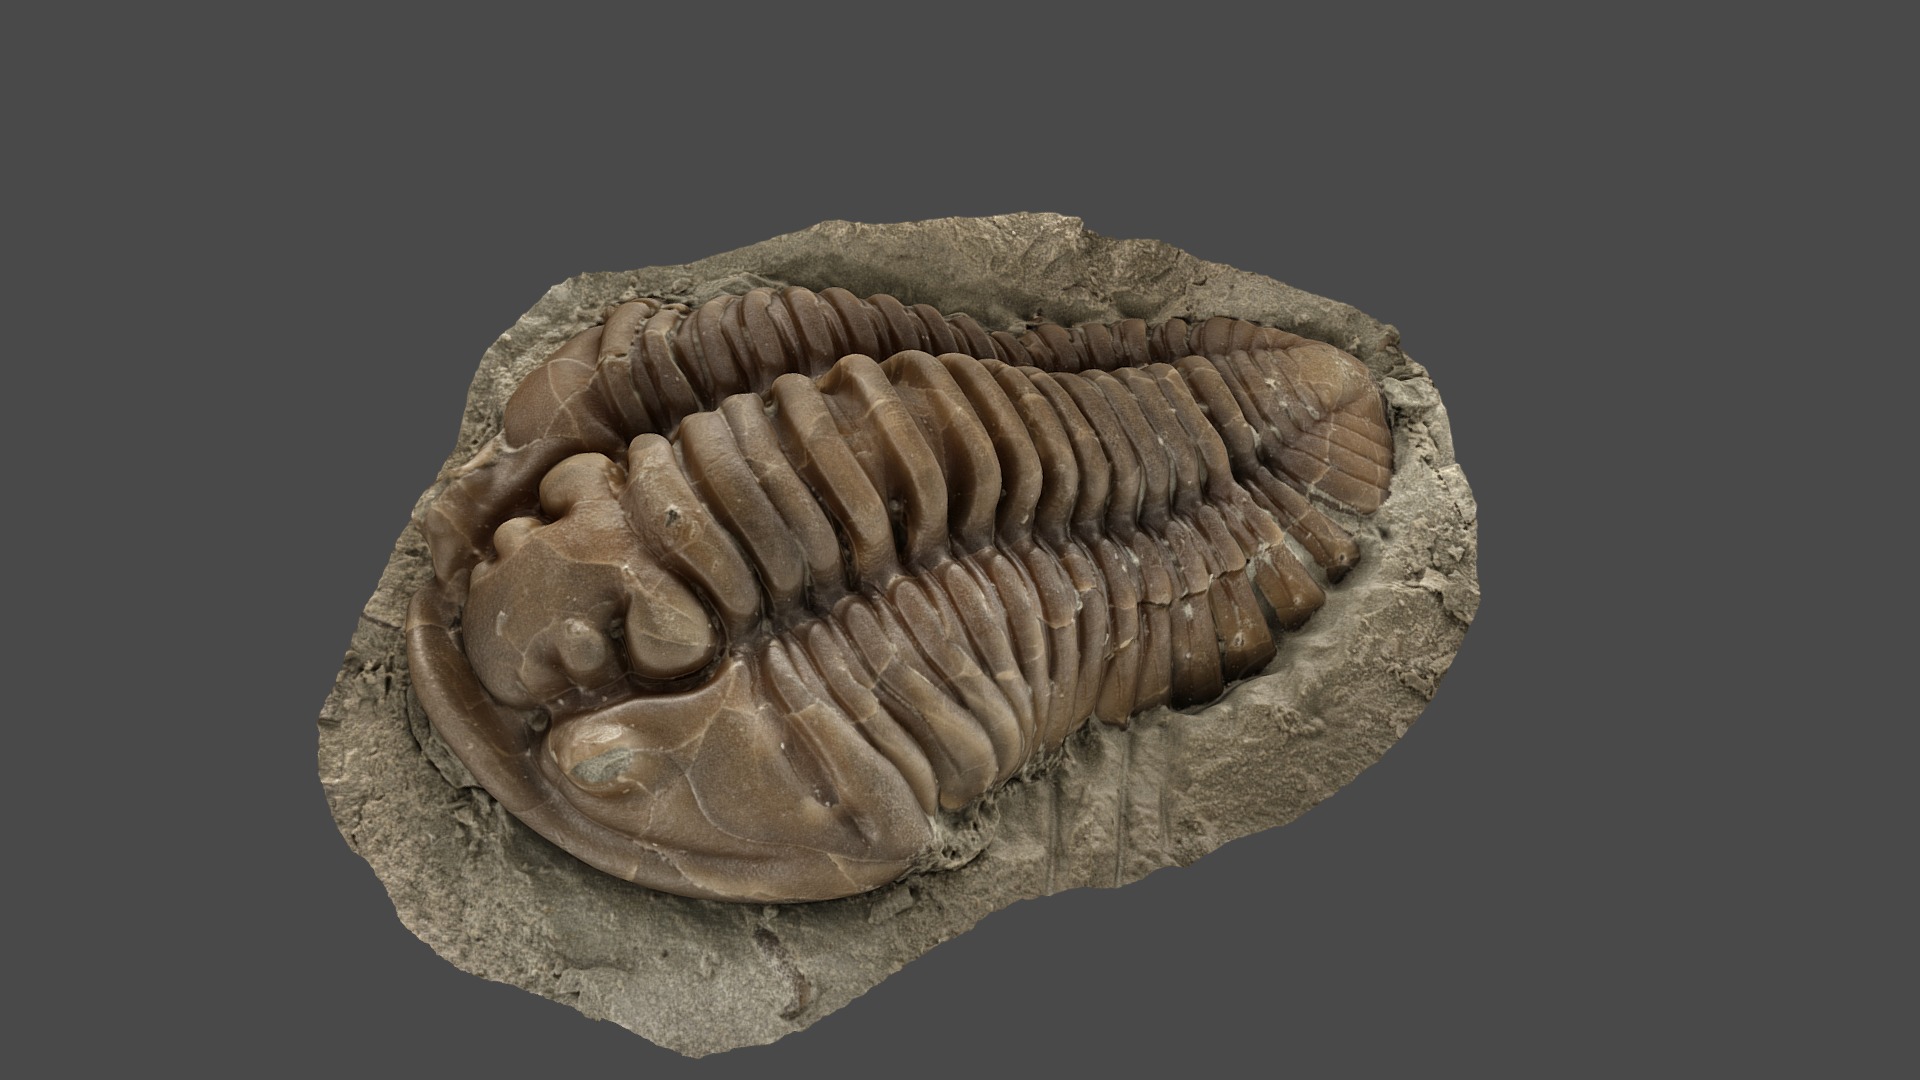 3D model Trilobite (Flexicalymene retrorsa) - This is a 3D model of the Trilobite (Flexicalymene retrorsa). The 3D model is about a close-up of a fossil.